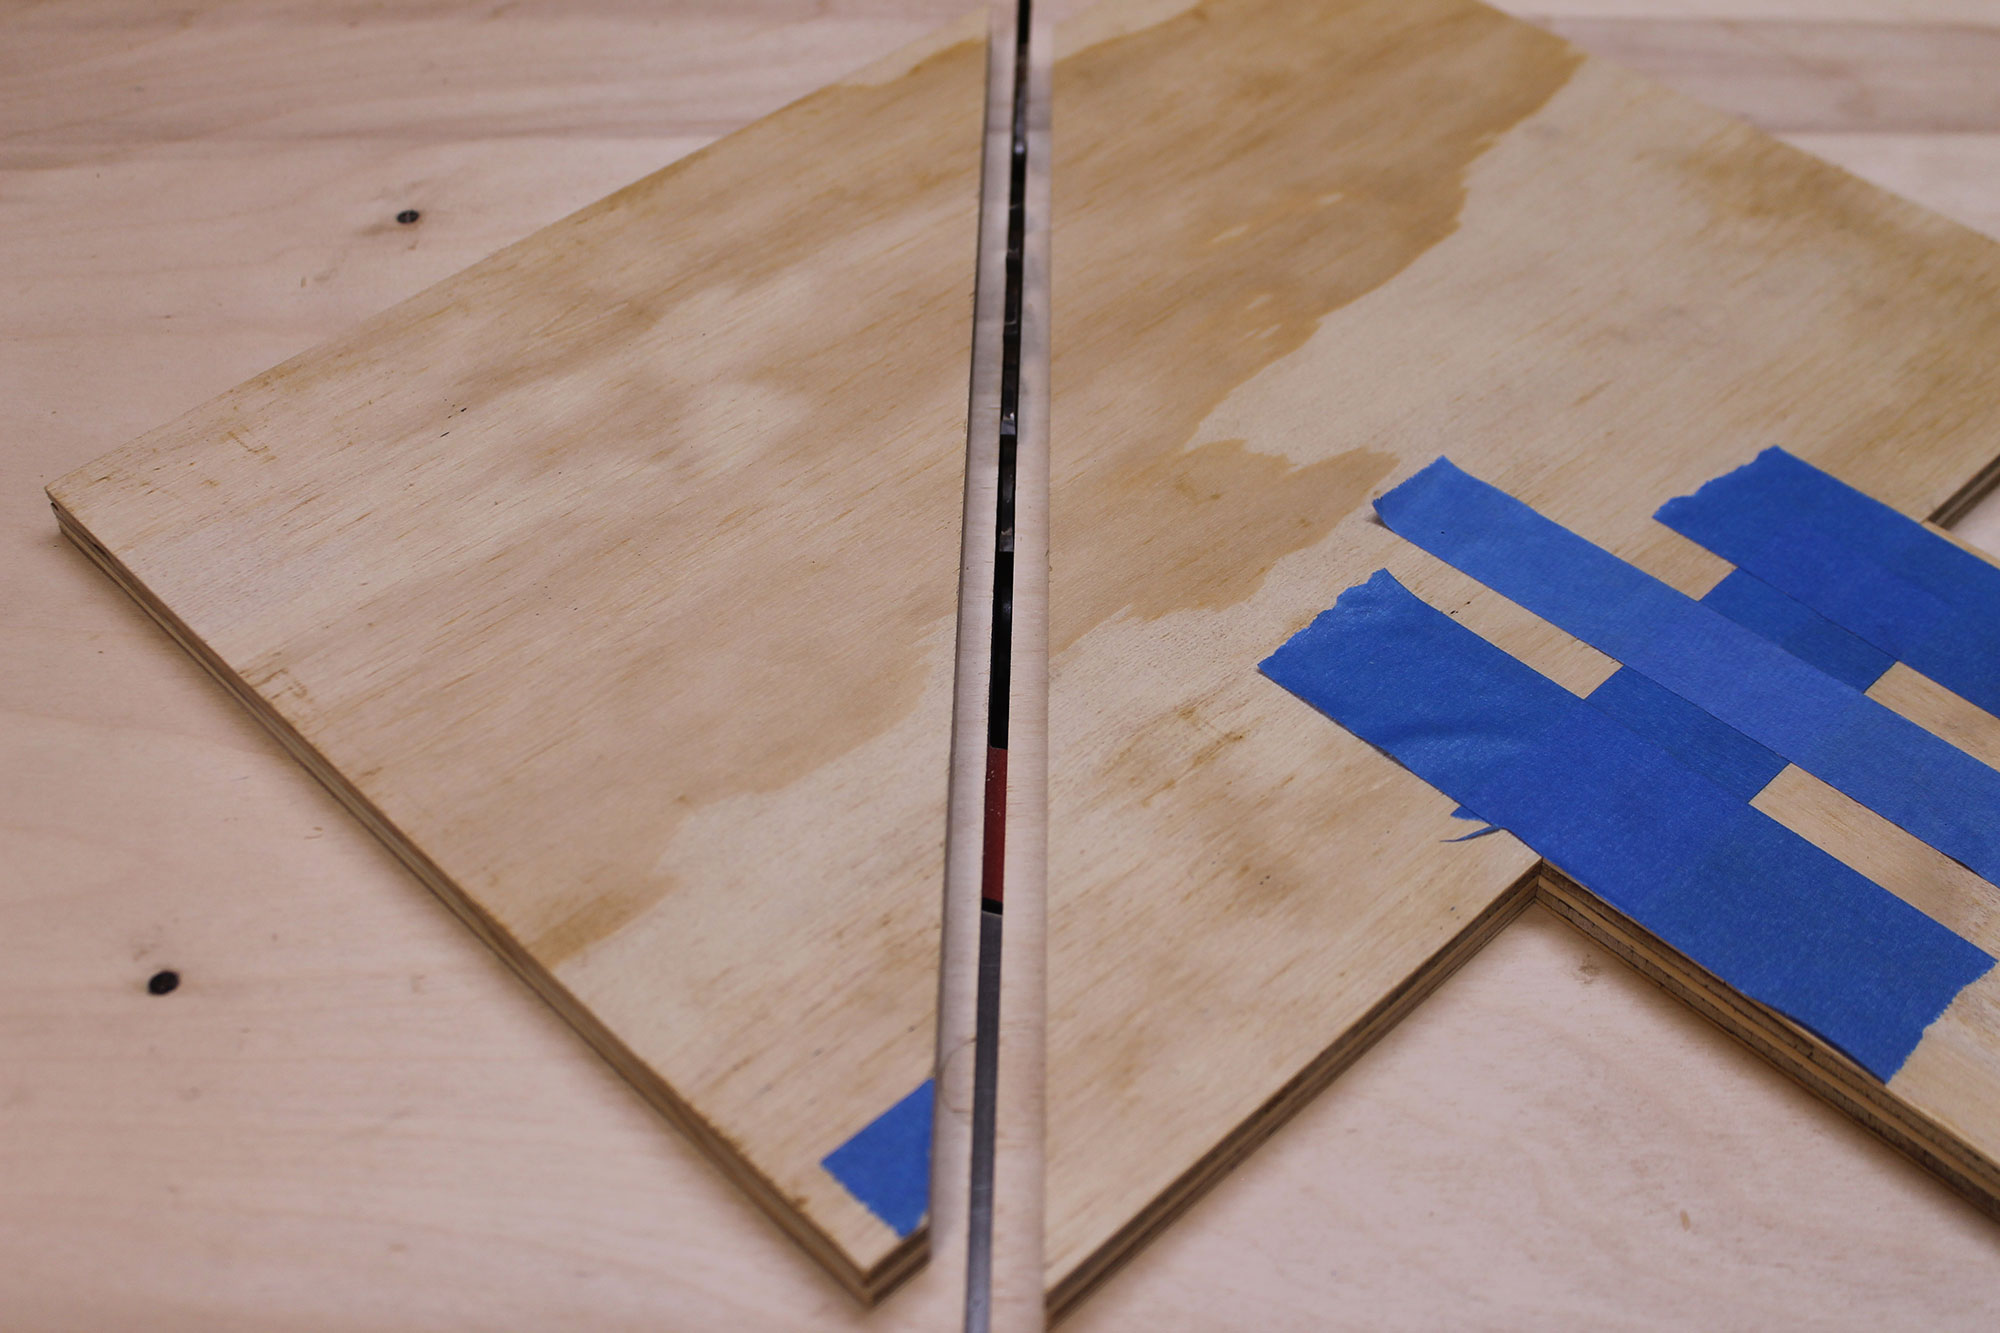 Photo 10 - The stand-alone piece (left) is a right isosceles triangle.